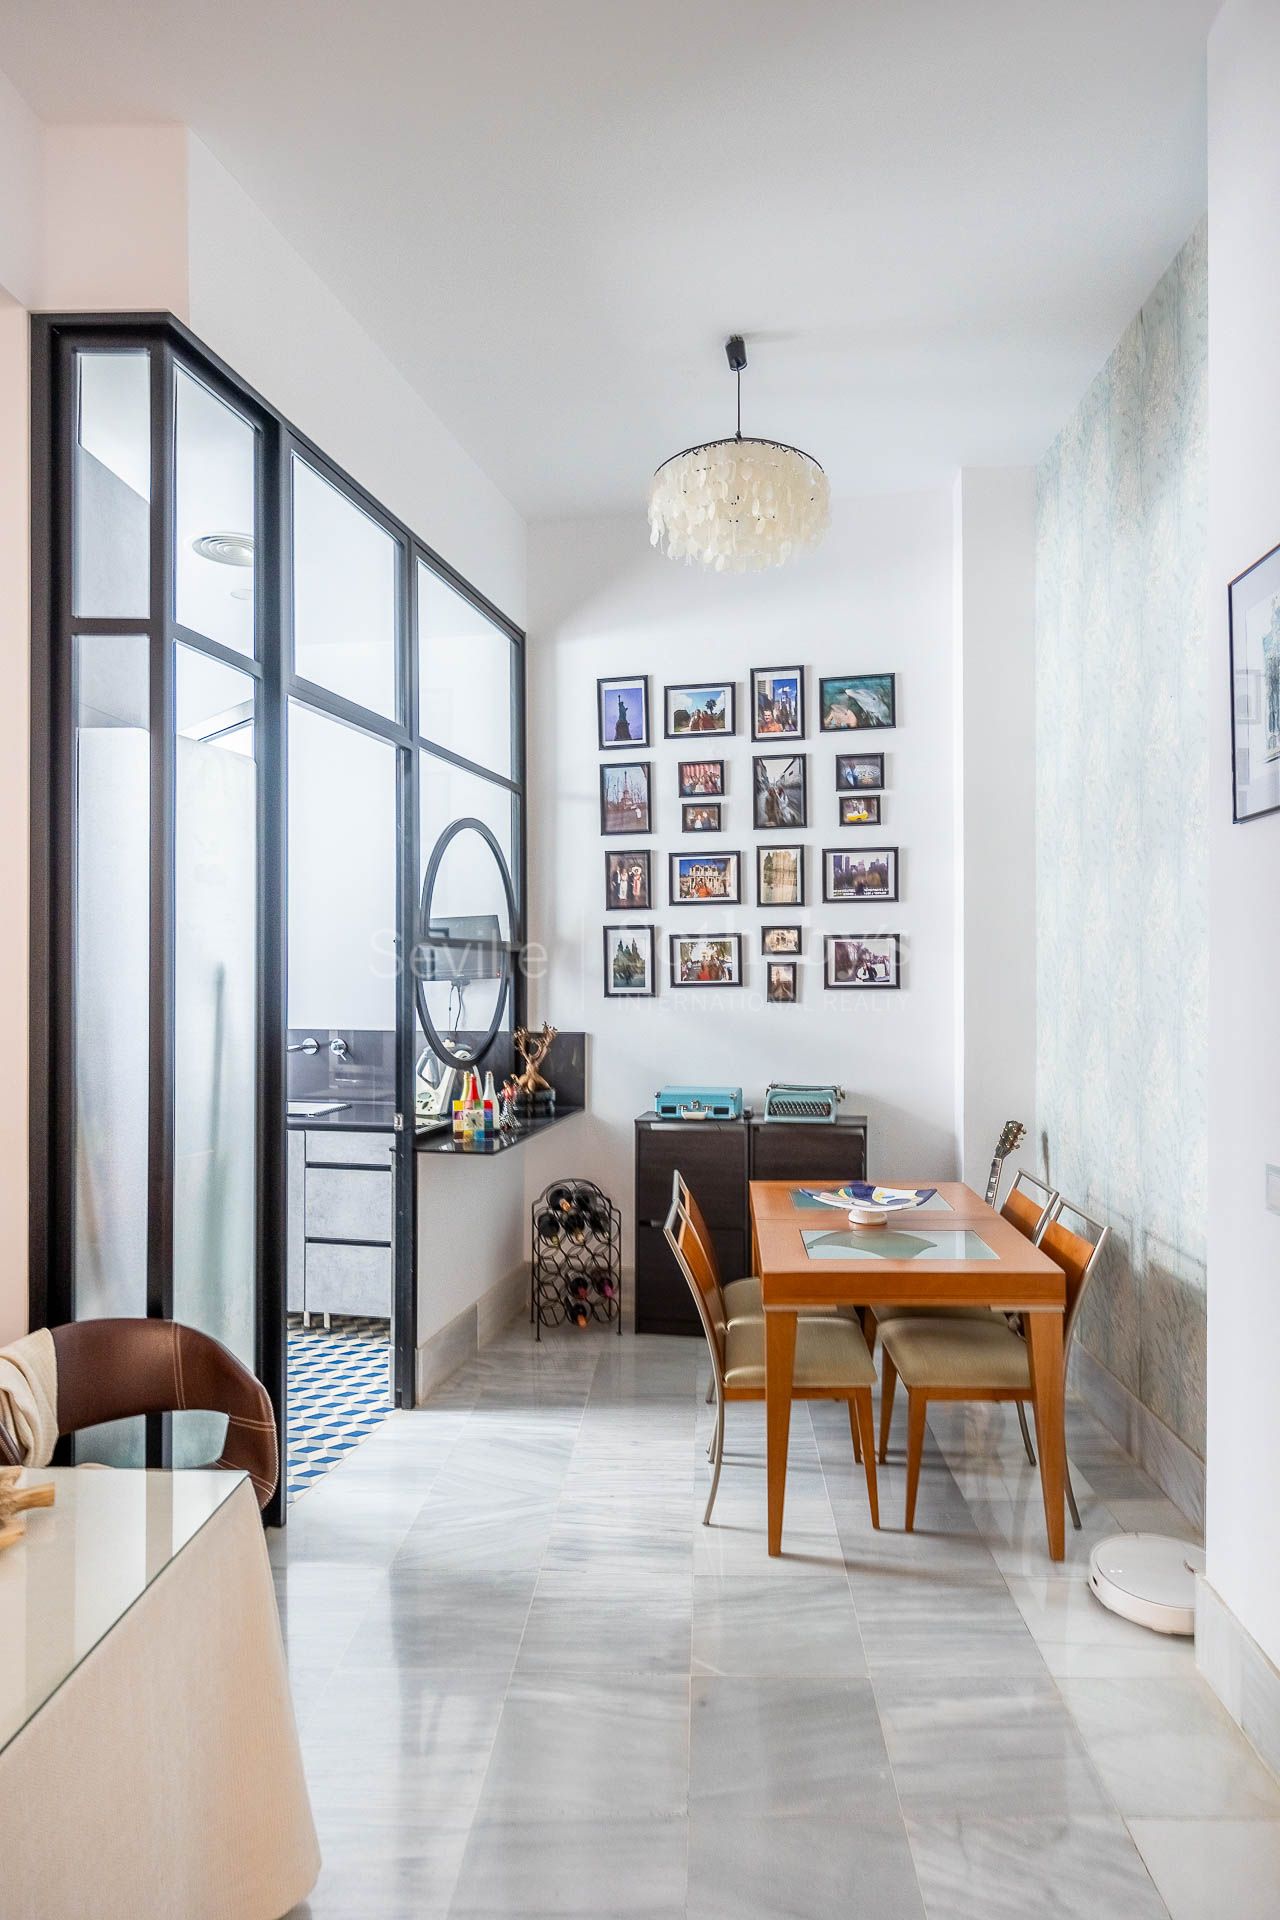 Refurbished Apartment in the Heart of Seville